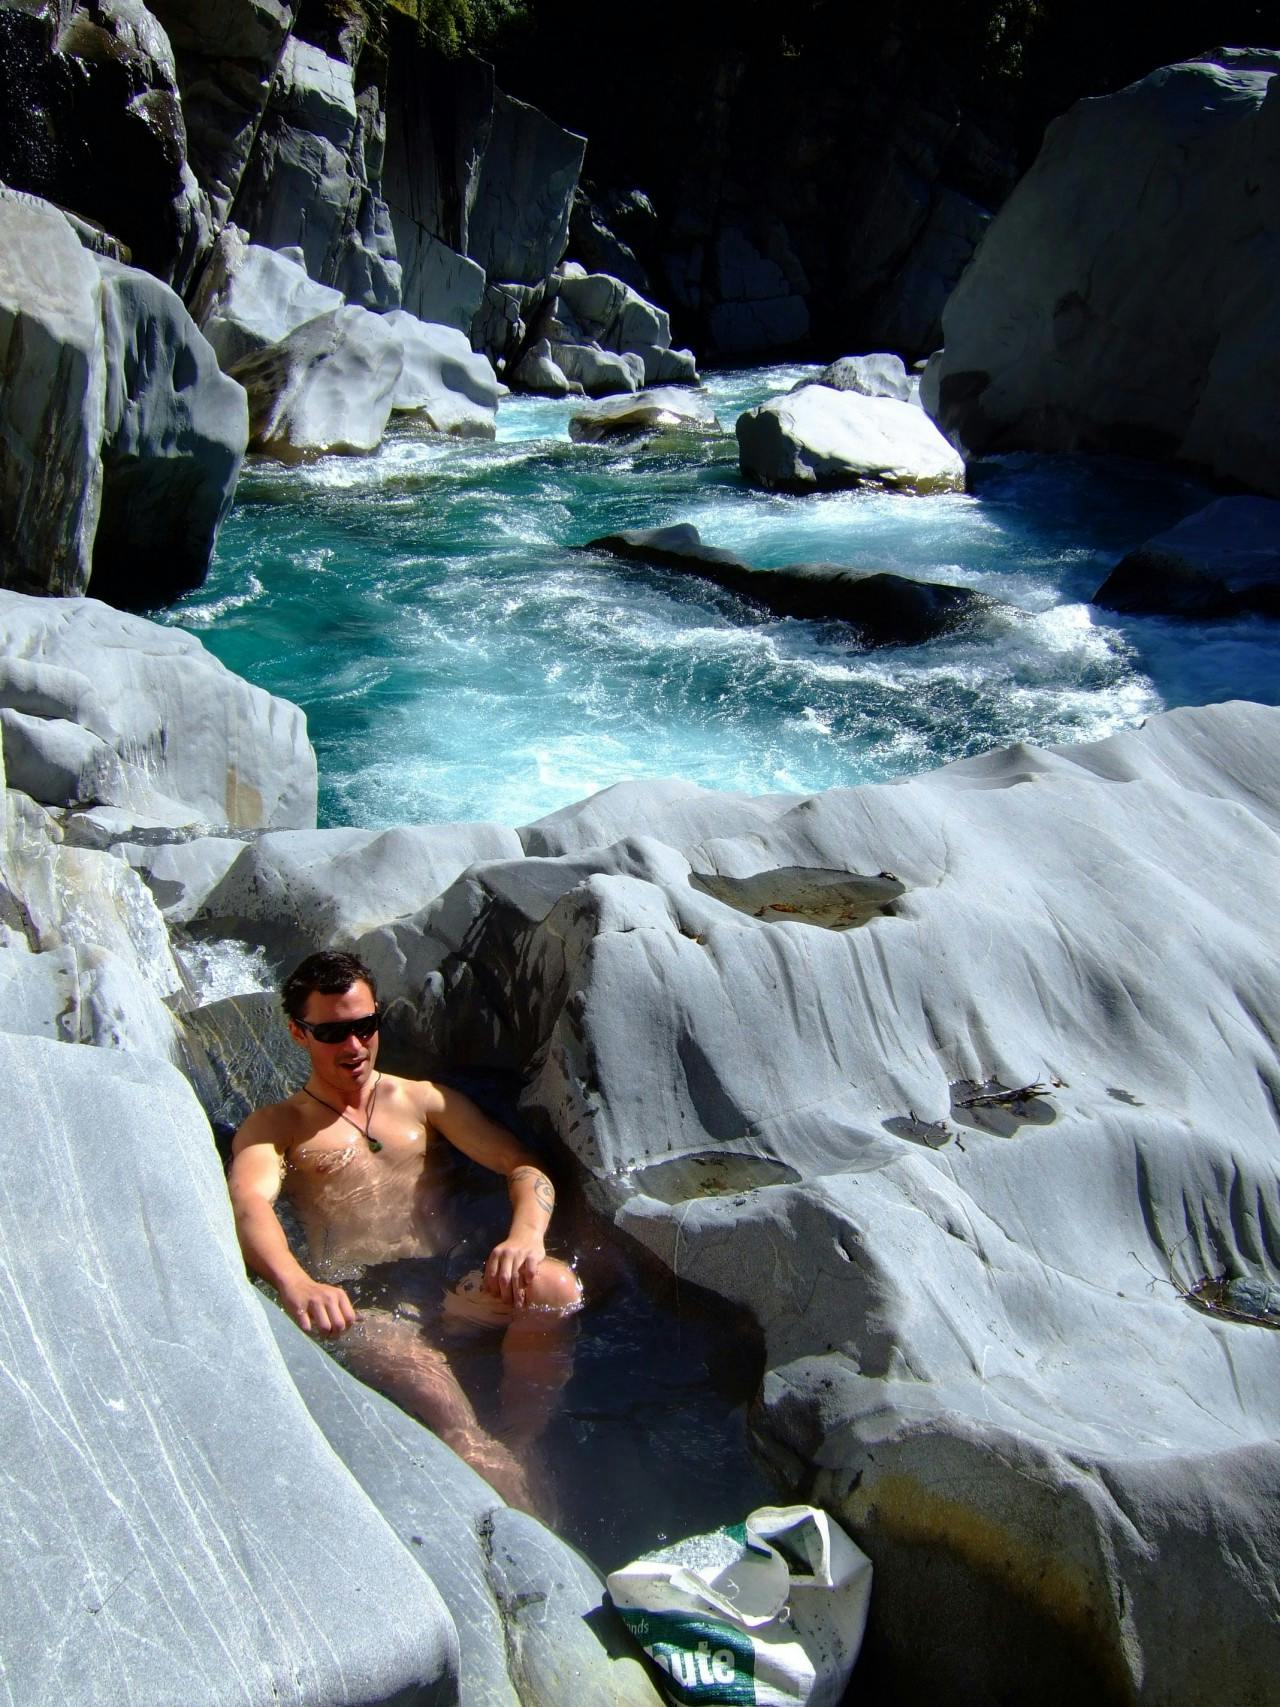 Soaking weary muscles in a hotpool, like this one on the Waitaha River, is one of life’s joys. Photo: Sally Jackson